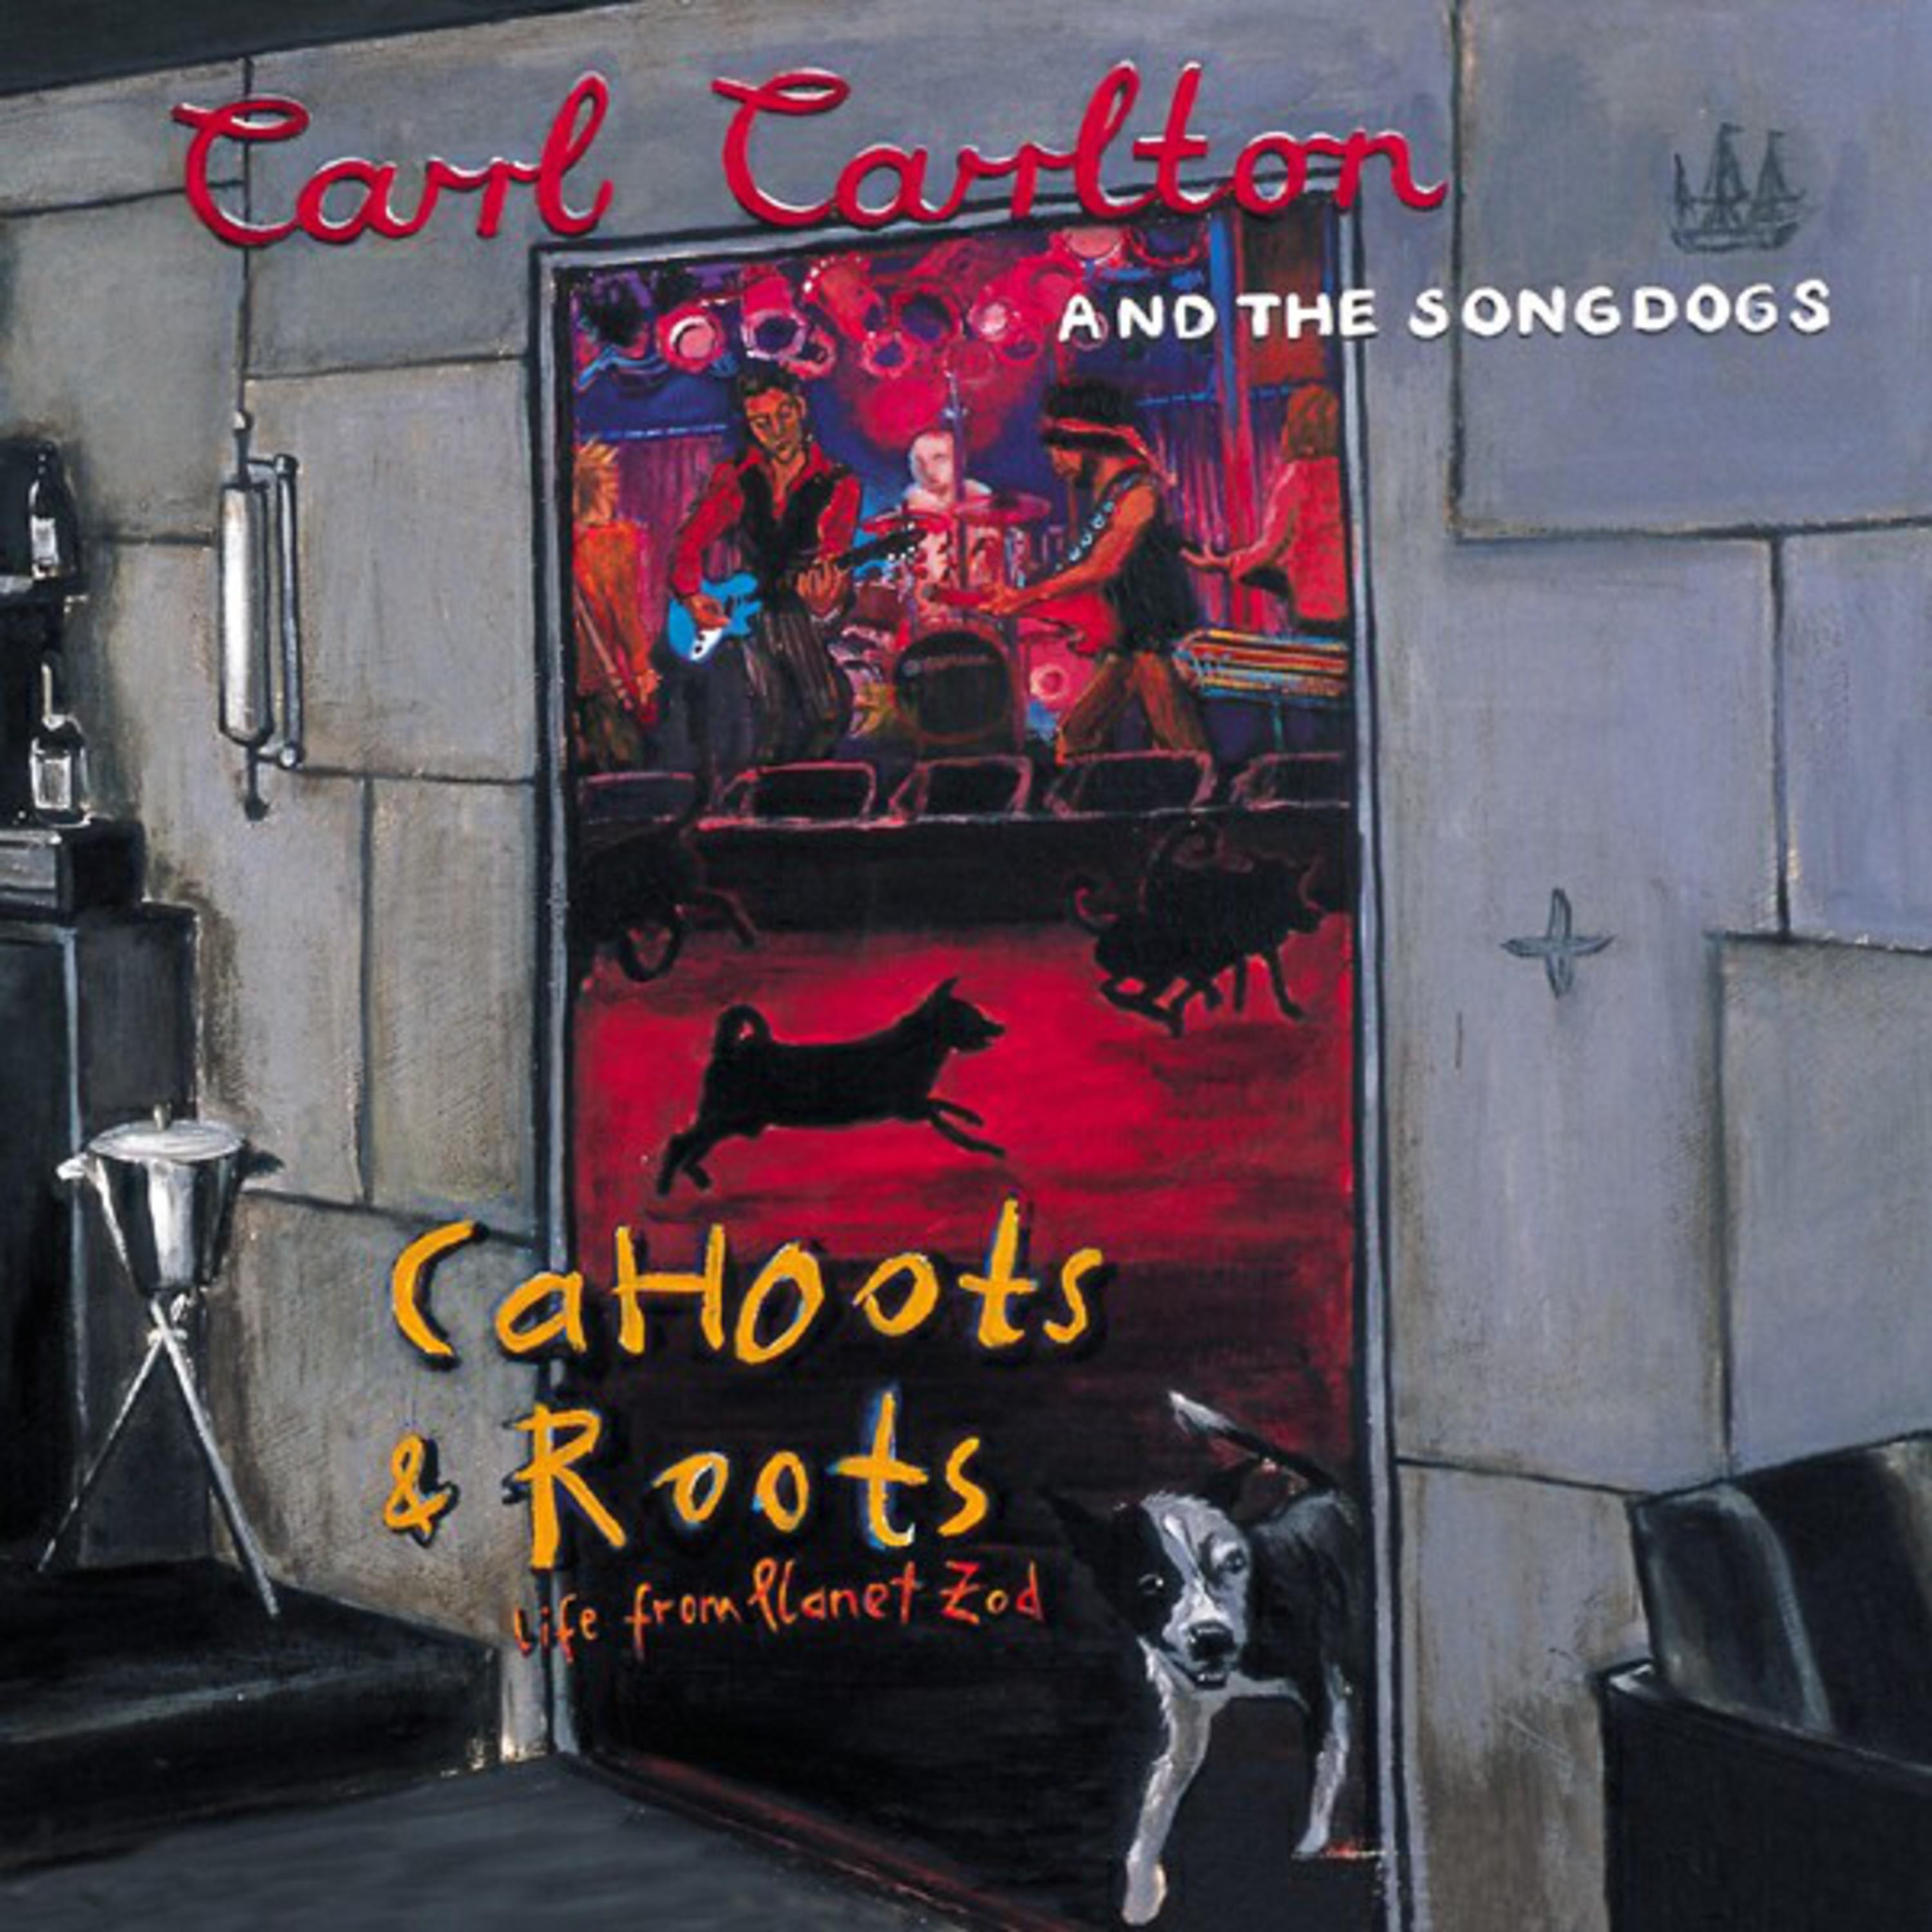 Cahoots & Roots - Life from Planet Zod